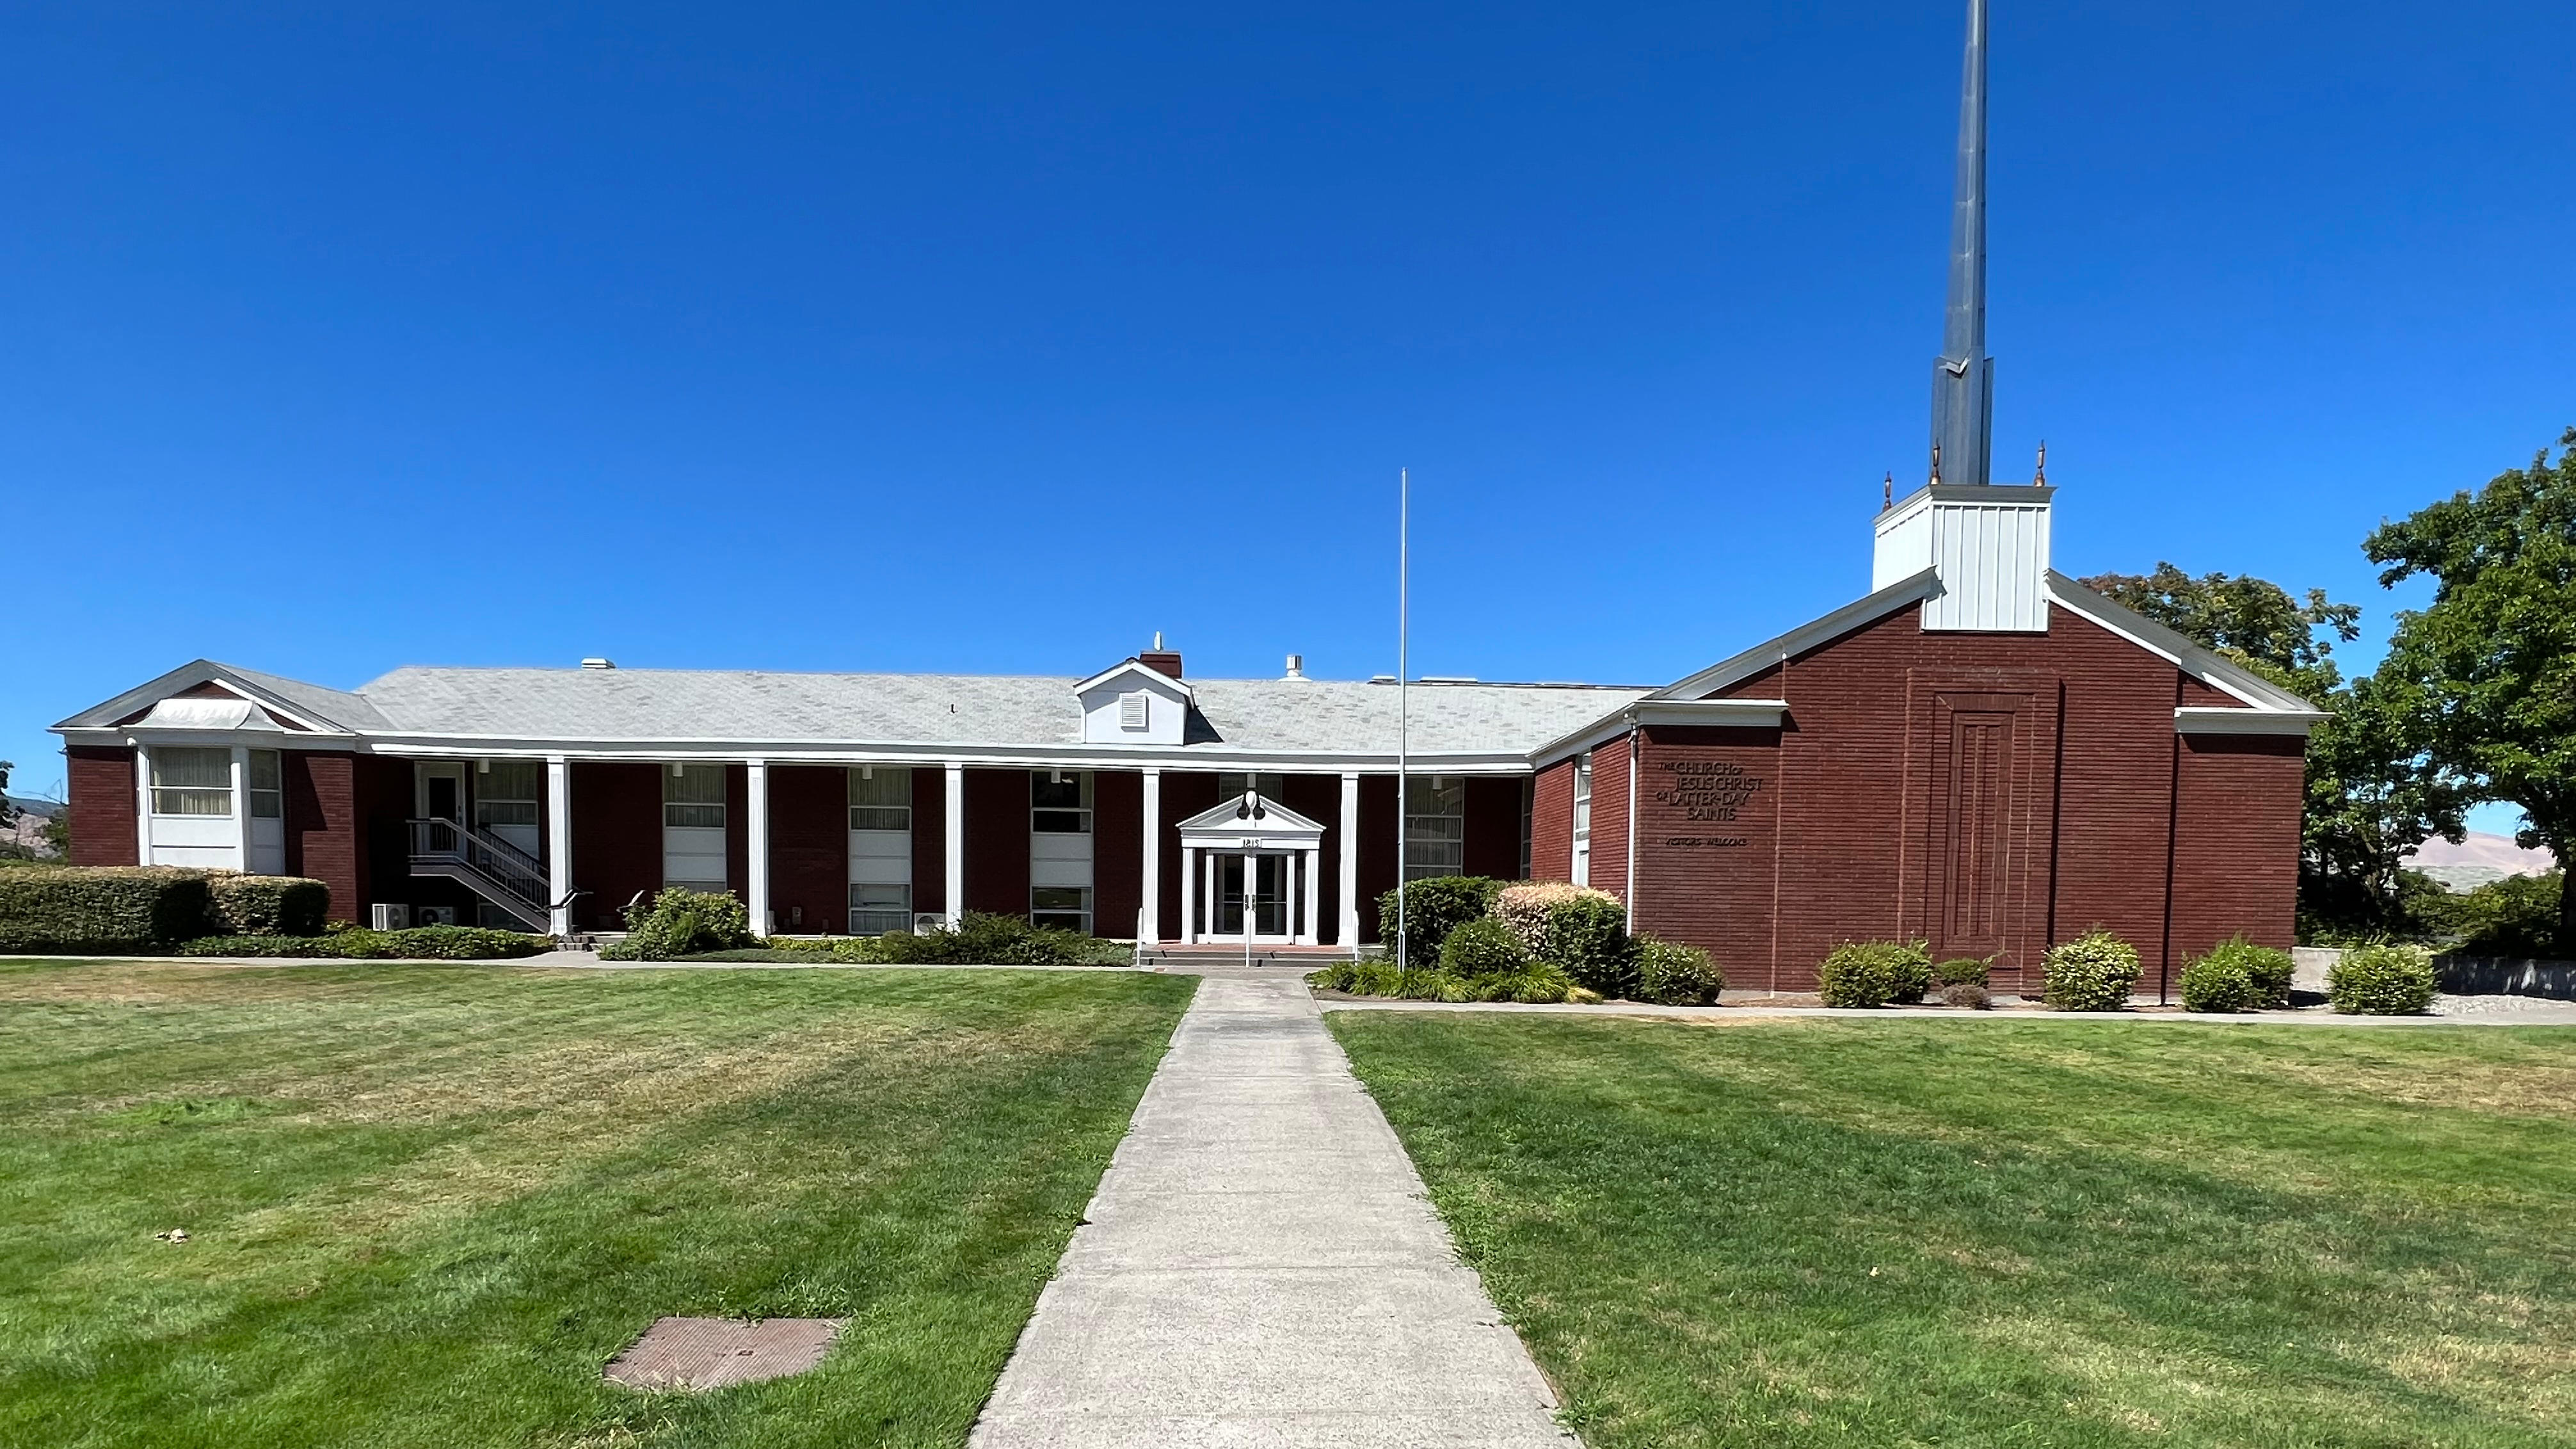 The Dalles Oregon Stake Center of The Church of Jesus Christ of Latter-Day Saints located at